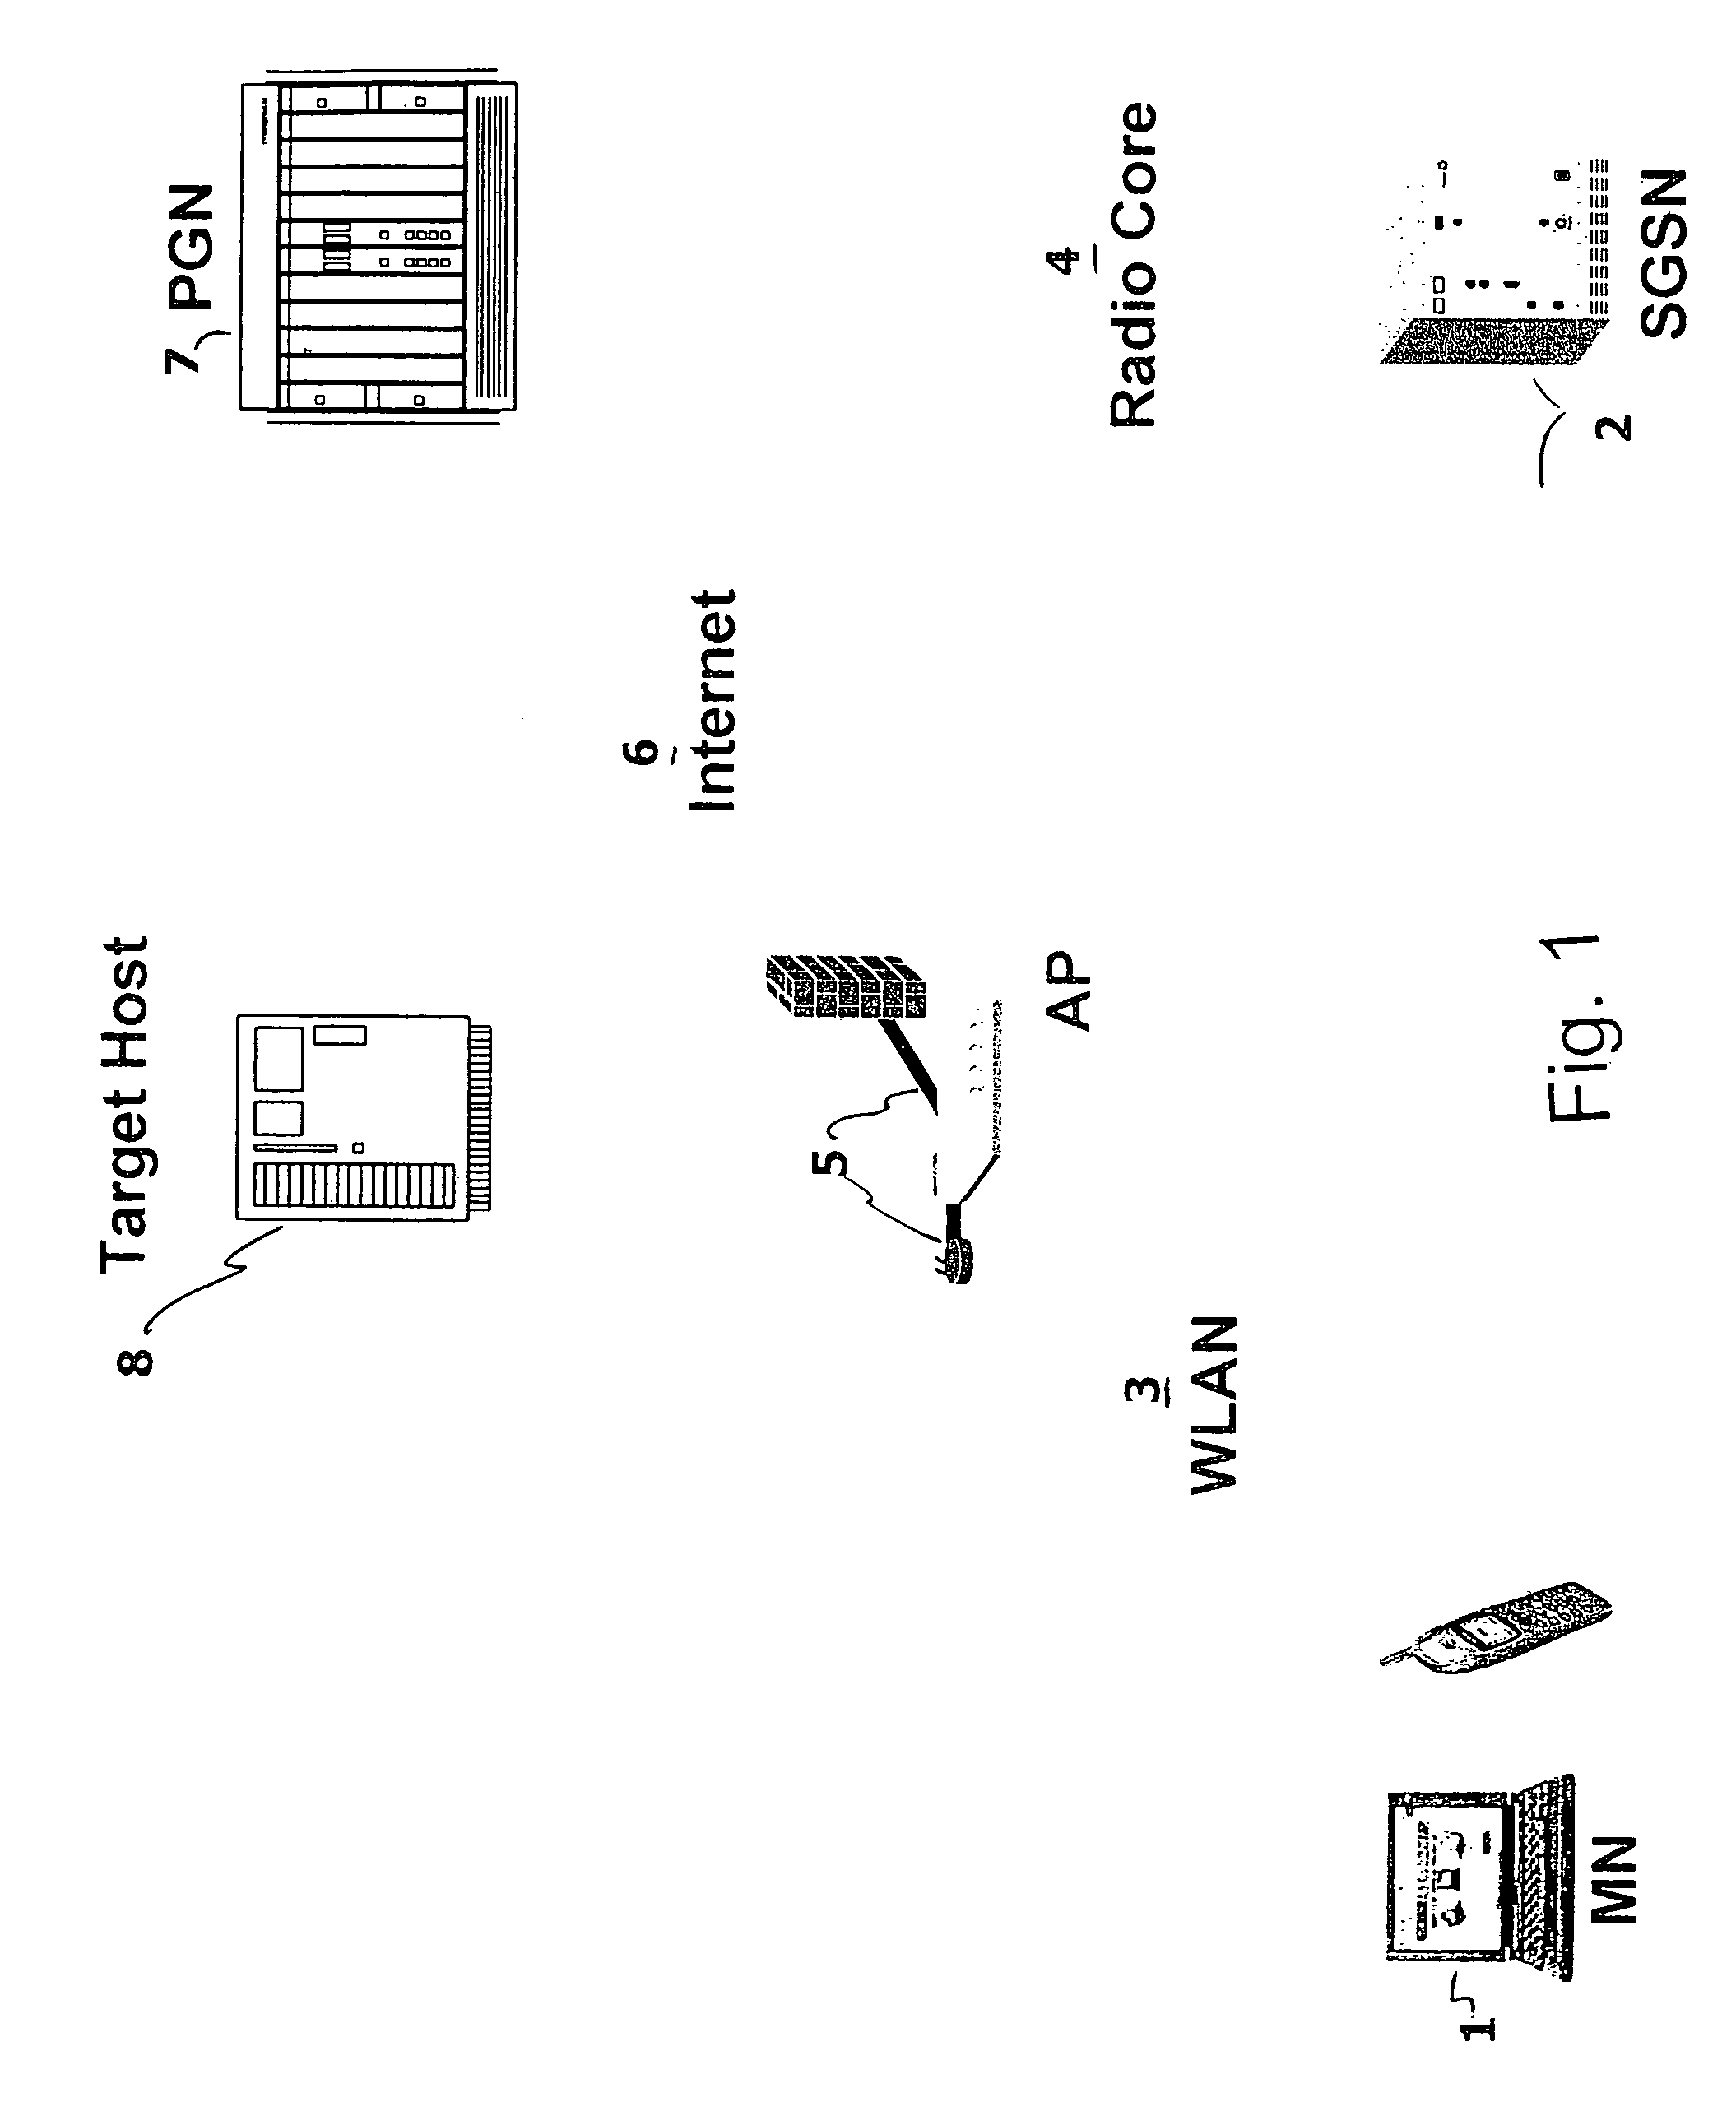 System and method for secure network roaming